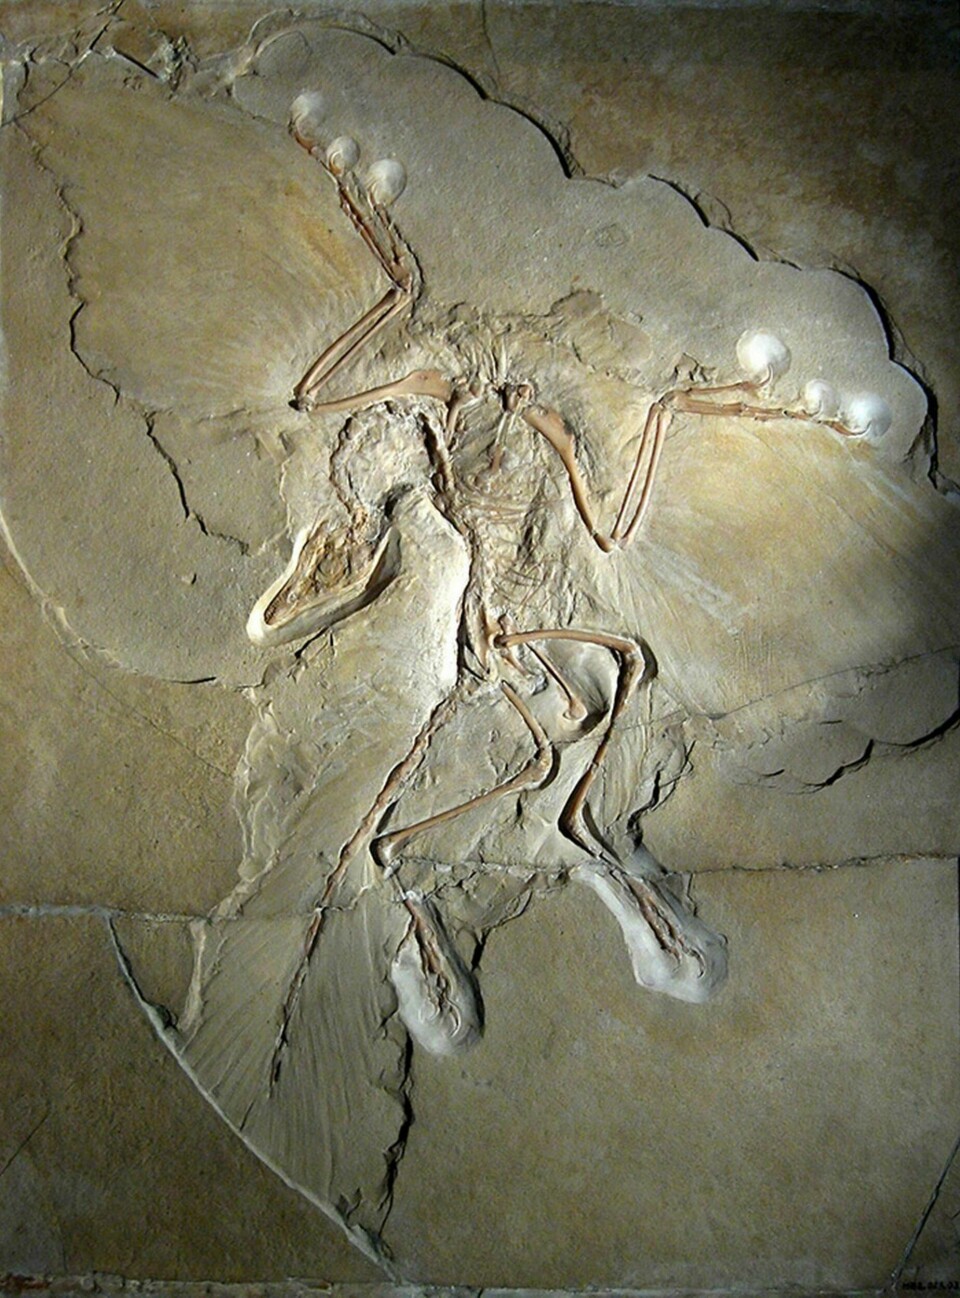 Fossil av Archaeopteryx lithographica på Berlins naturmuseum. Foto: Wikimedia Commons / H. Raab